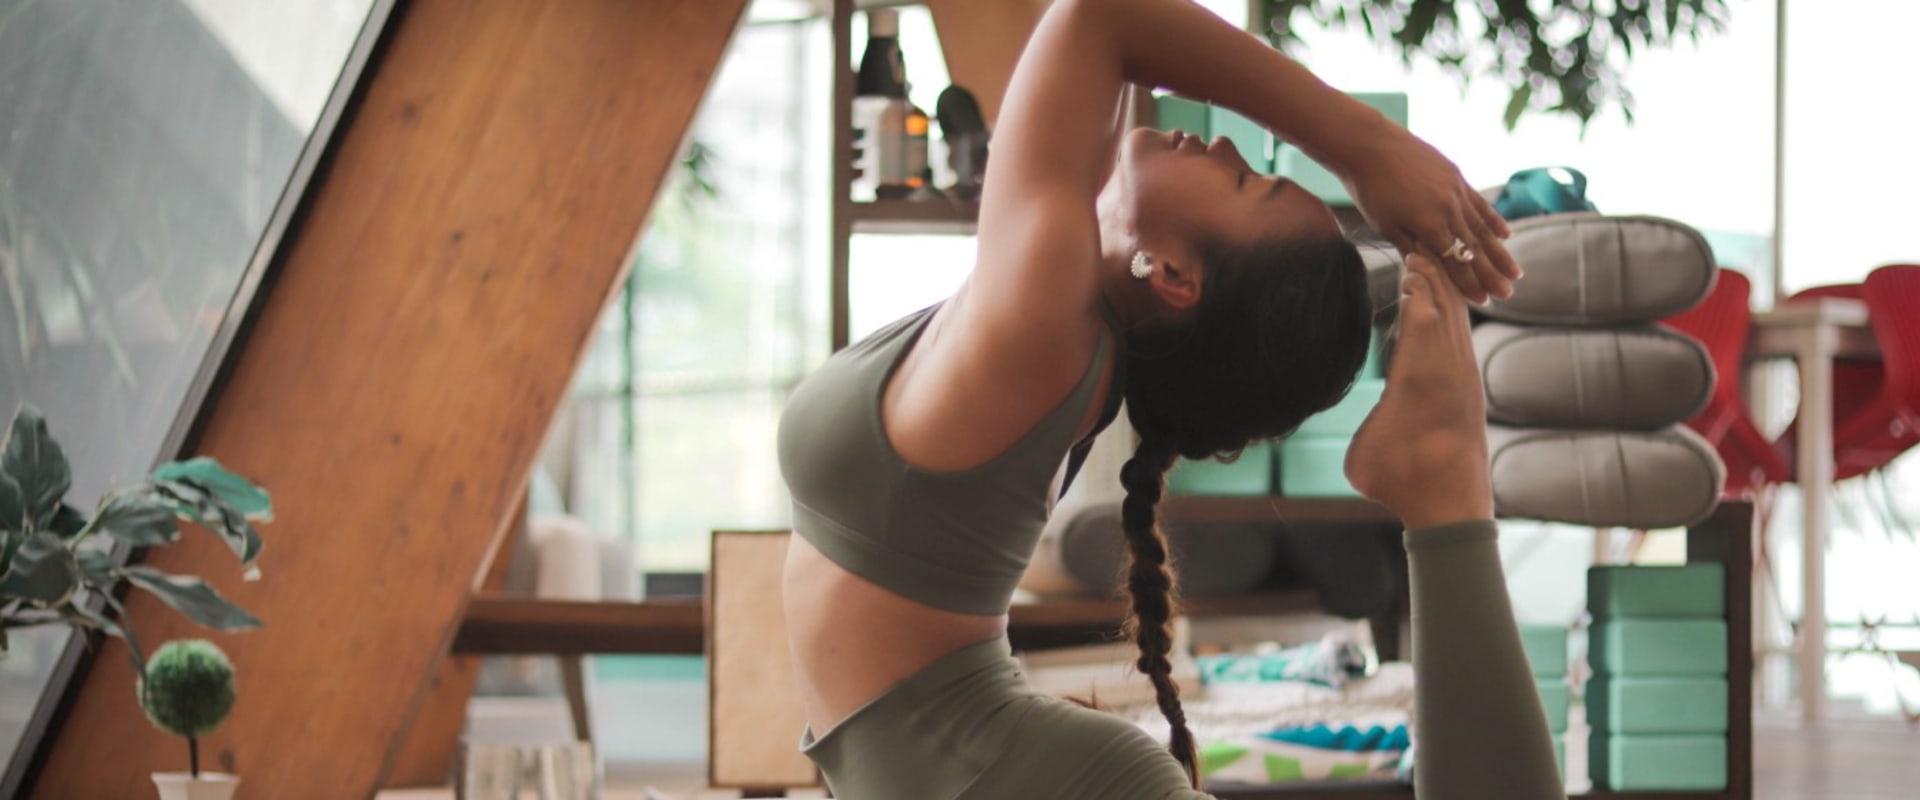 What happens if i do yoga for 30 days?